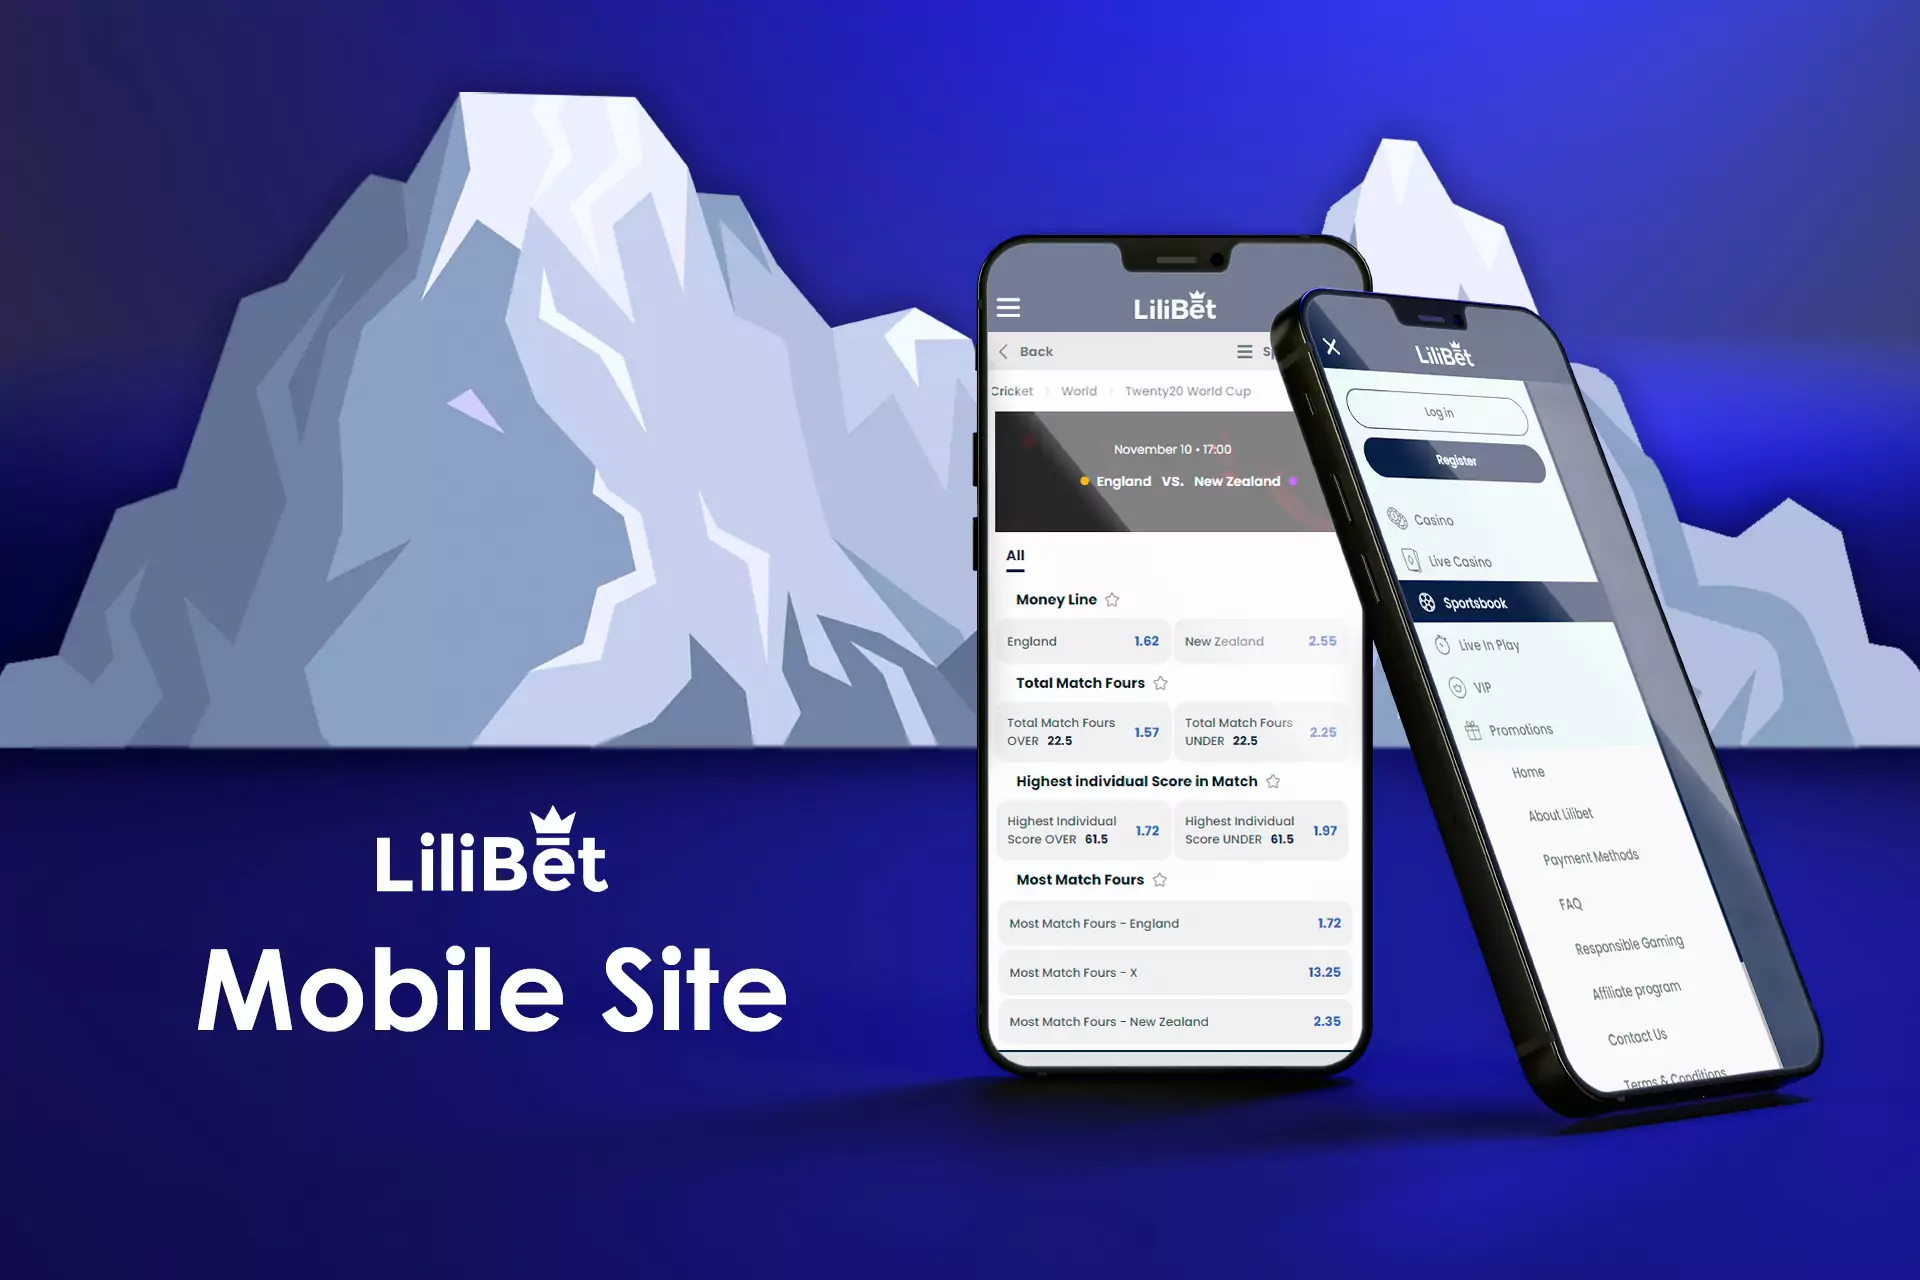 There is no Lilibet app yet but you can use the browser version of the site on your smartphone.